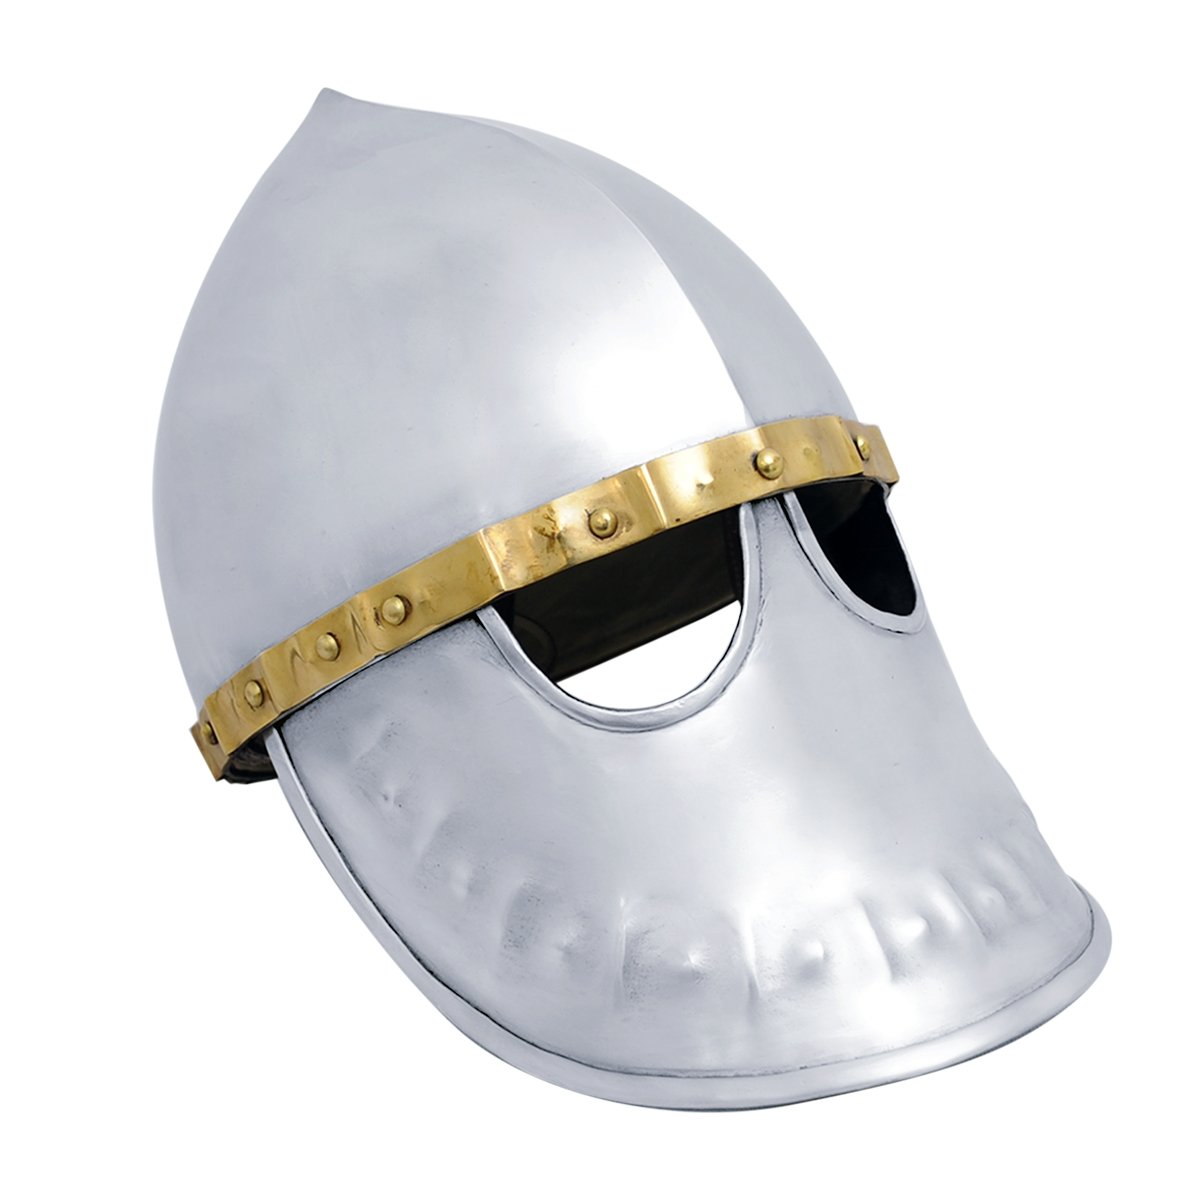 Italo Norman helmet with Face Plate C.1170, Size XL